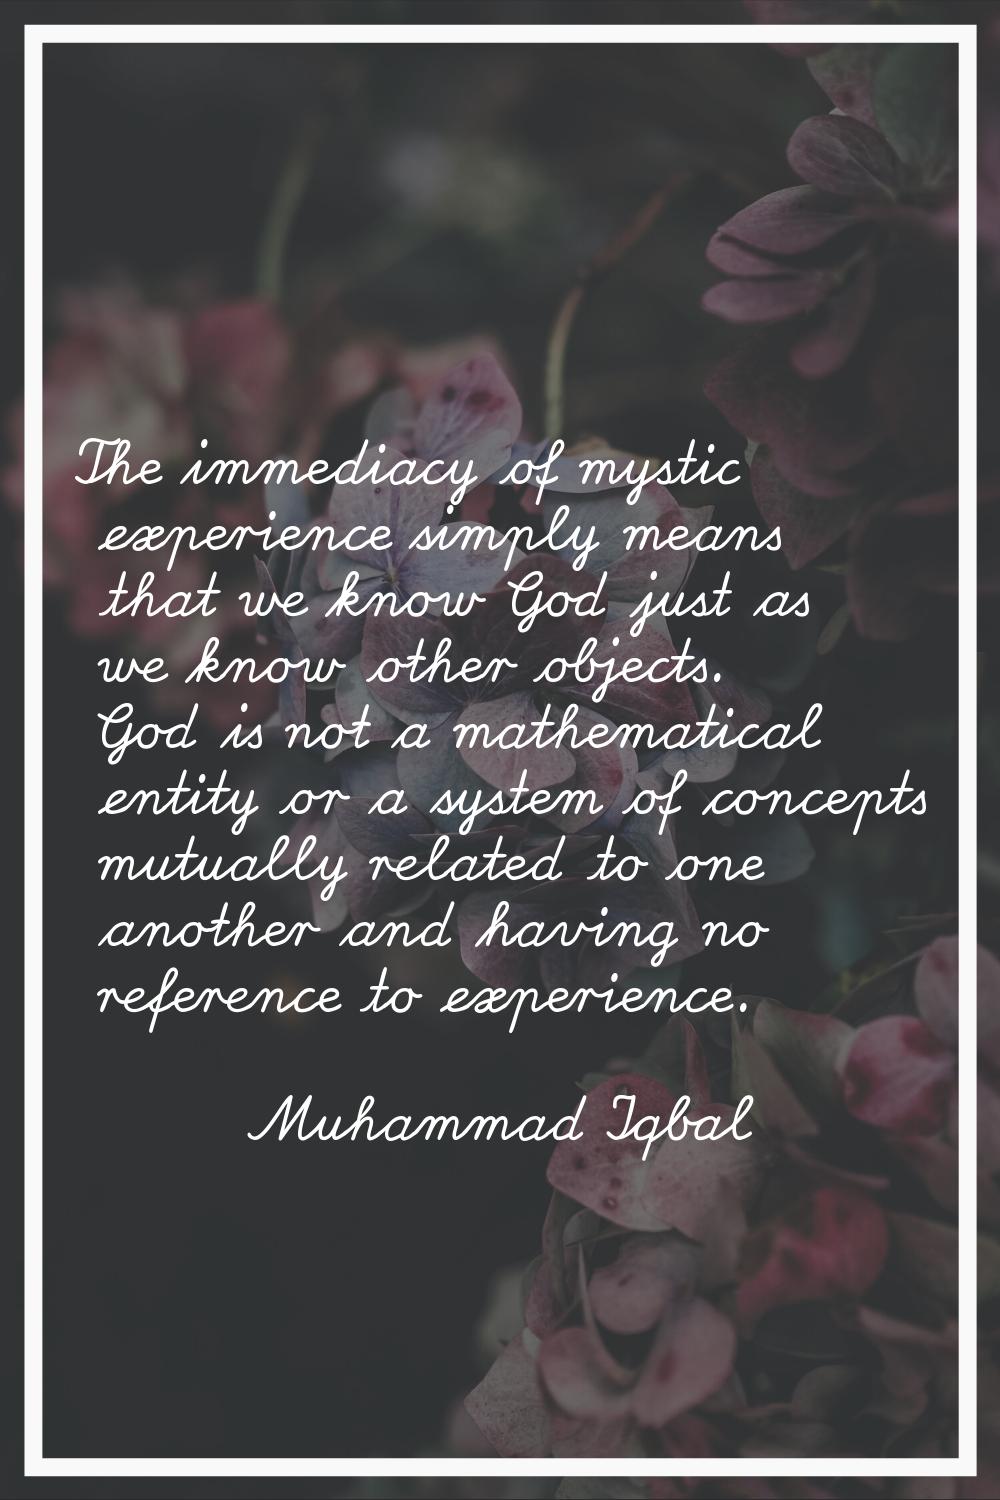 The immediacy of mystic experience simply means that we know God just as we know other objects. God